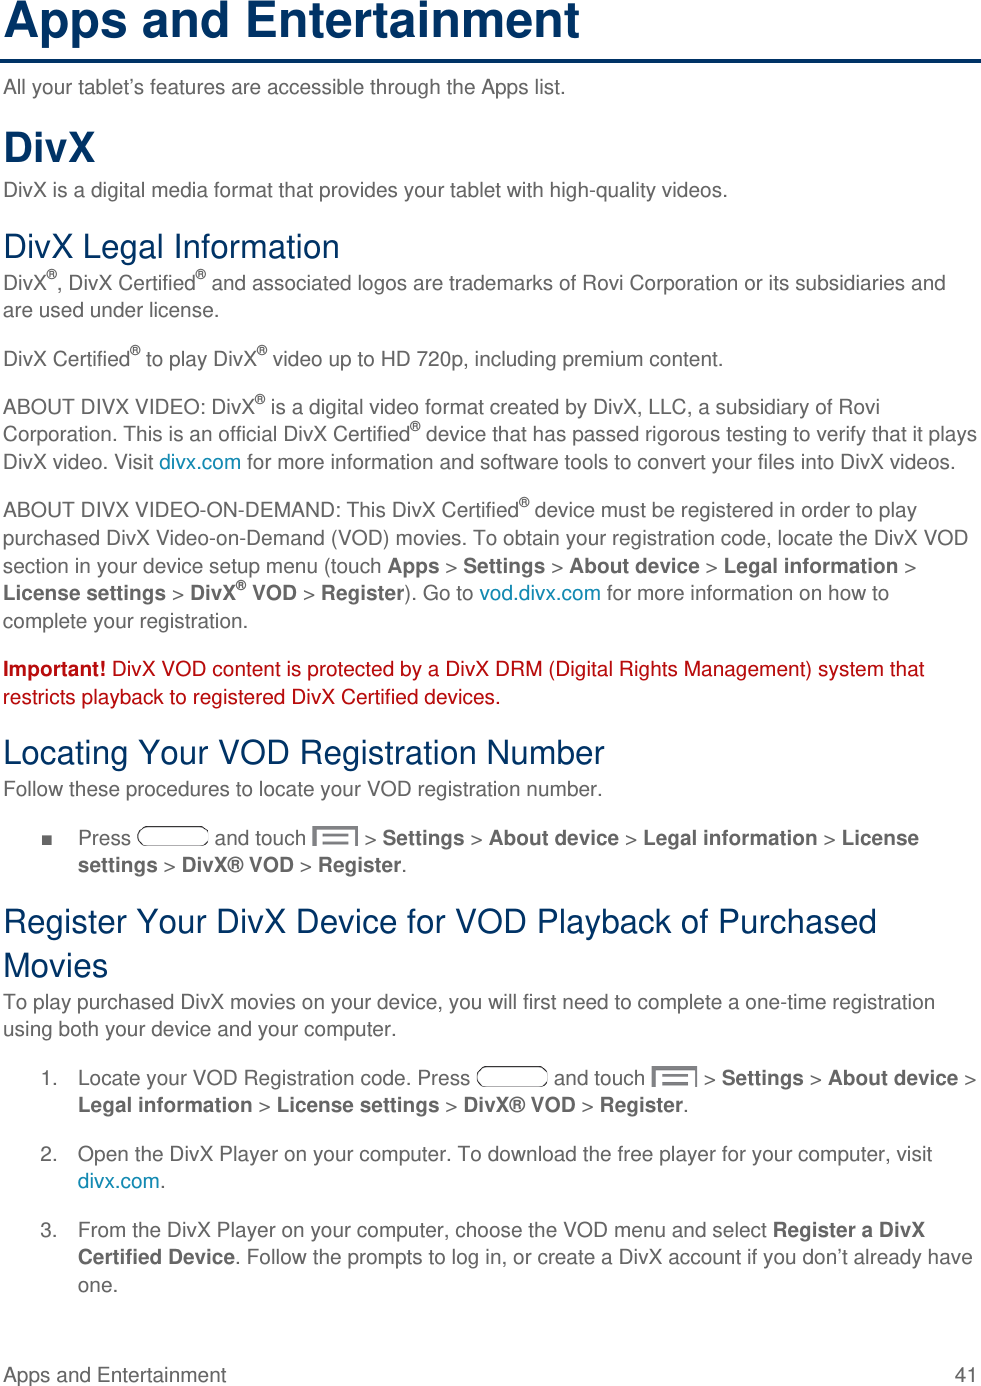 Apps and Entertainment All your tablet’s features are accessible through the Apps list. DivX DivX is a digital media format that provides your tablet with high-quality videos. DivX Legal Information DivX®, DivX Certified® and associated logos are trademarks of Rovi Corporation or its subsidiaries and are used under license. DivX Certified® to play DivX® video up to HD 720p, including premium content.  ABOUT DIVX VIDEO: DivX® is a digital video format created by DivX, LLC, a subsidiary of Rovi Corporation. This is an official DivX Certified® device that has passed rigorous testing to verify that it plays DivX video. Visit divx.com for more information and software tools to convert your files into DivX videos. ABOUT DIVX VIDEO-ON-DEMAND: This DivX Certified® device must be registered in order to play purchased DivX Video-on-Demand (VOD) movies. To obtain your registration code, locate the DivX VOD section in your device setup menu (touch Apps &gt; Settings &gt; About device &gt; Legal information &gt; License settings &gt; DivX® VOD &gt; Register). Go to vod.divx.com for more information on how to complete your registration.  Important! DivX VOD content is protected by a DivX DRM (Digital Rights Management) system that restricts playback to registered DivX Certified devices. Locating Your VOD Registration Number Follow these procedures to locate your VOD registration number. ■ Press   and touch   &gt; Settings &gt; About device &gt; Legal information &gt; License settings &gt; DivX® VOD &gt; Register. Register Your DivX Device for VOD Playback of Purchased Movies To play purchased DivX movies on your device, you will first need to complete a one-time registration using both your device and your computer.  1. Locate your VOD Registration code. Press   and touch   &gt; Settings &gt; About device &gt; Legal information &gt; License settings &gt; DivX® VOD &gt; Register. 2. Open the DivX Player on your computer. To download the free player for your computer, visit divx.com. 3. From the DivX Player on your computer, choose the VOD menu and select Register a DivX Certified Device. Follow the prompts to log in, or create a DivX account if you don’t already have one. Apps and Entertainment 41   